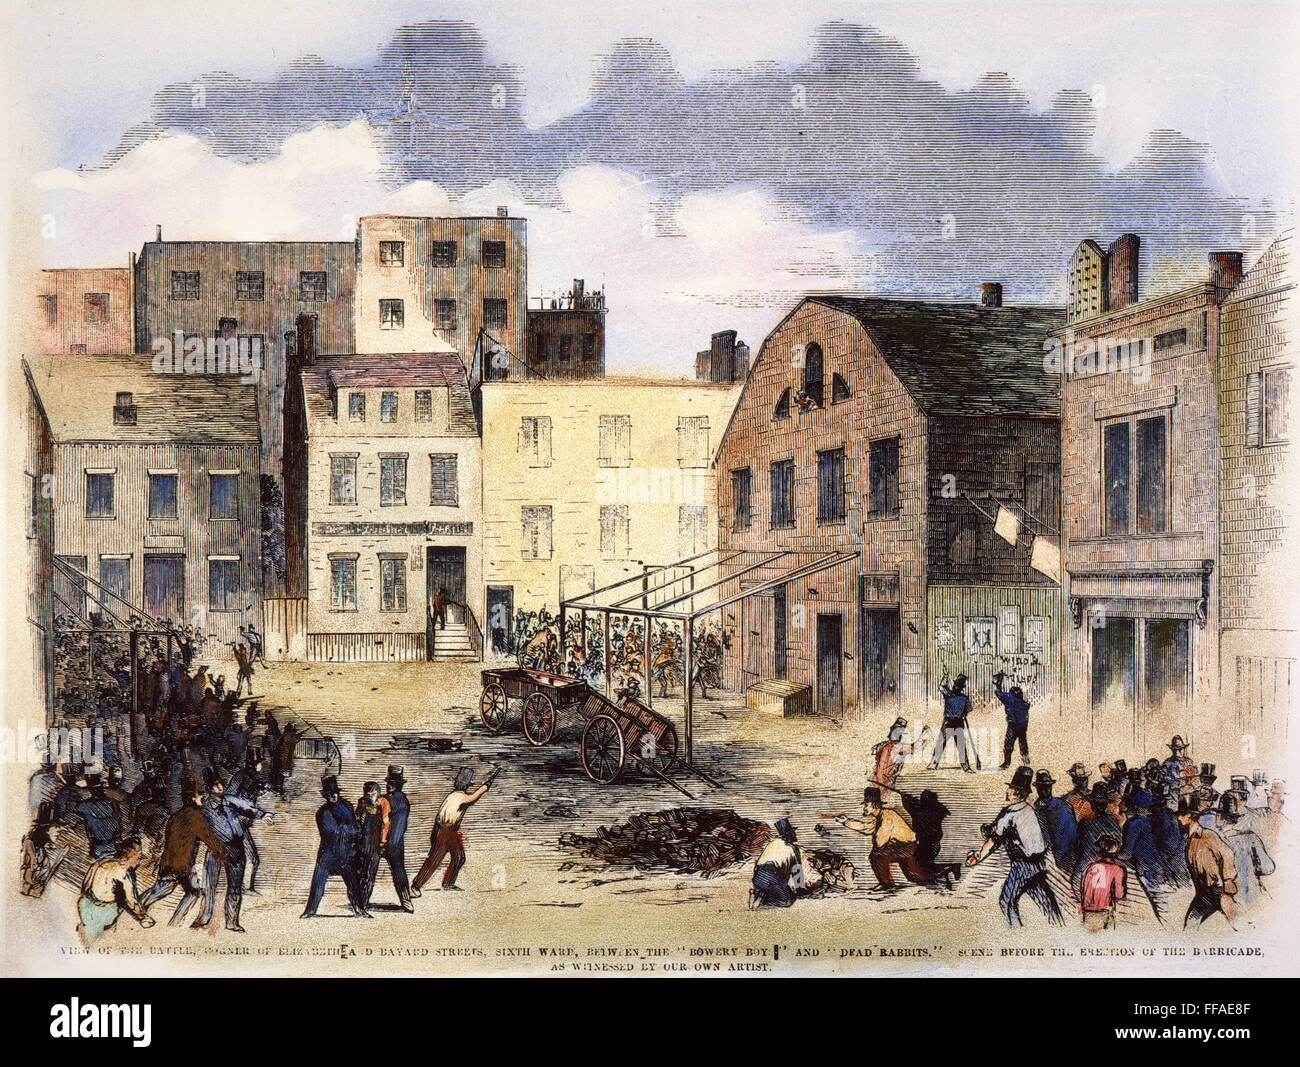 NEW YORK GANG WAR, 1857. /nBattle between the 'Bowery Boys' and the 'Dead Rabbits', two New York gangs, at the corner of Elizabeth and Bayard Streets, 4 July 1857. Wood engraving from a contemporary American newspaper. Stock Photo